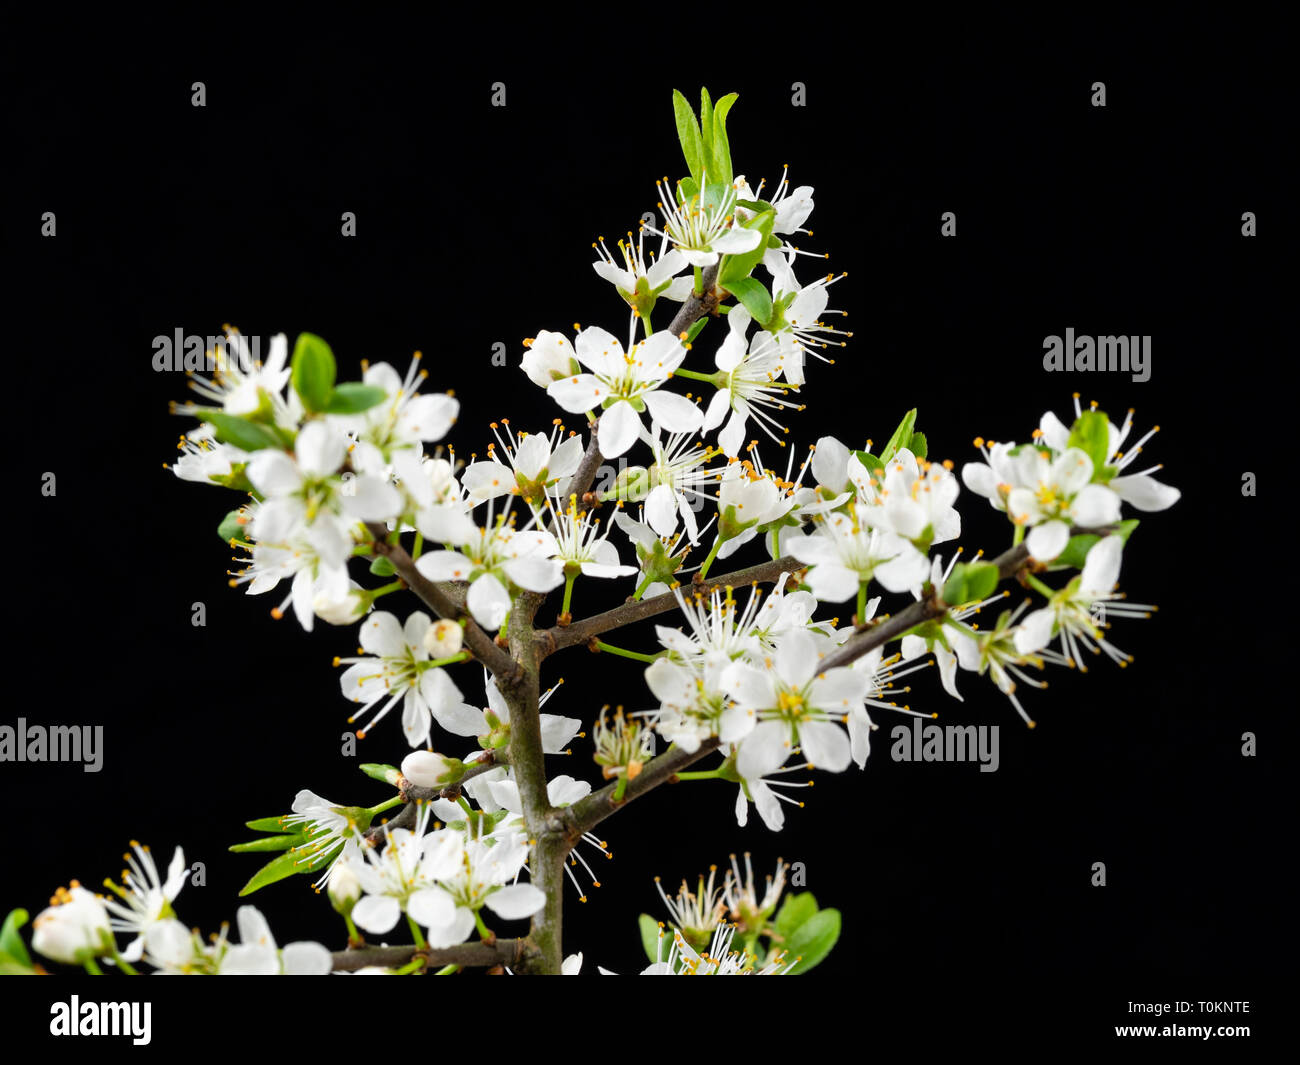 White spring flowers of the blackthorn, Prunus spinosa, against a black background Stock Photo